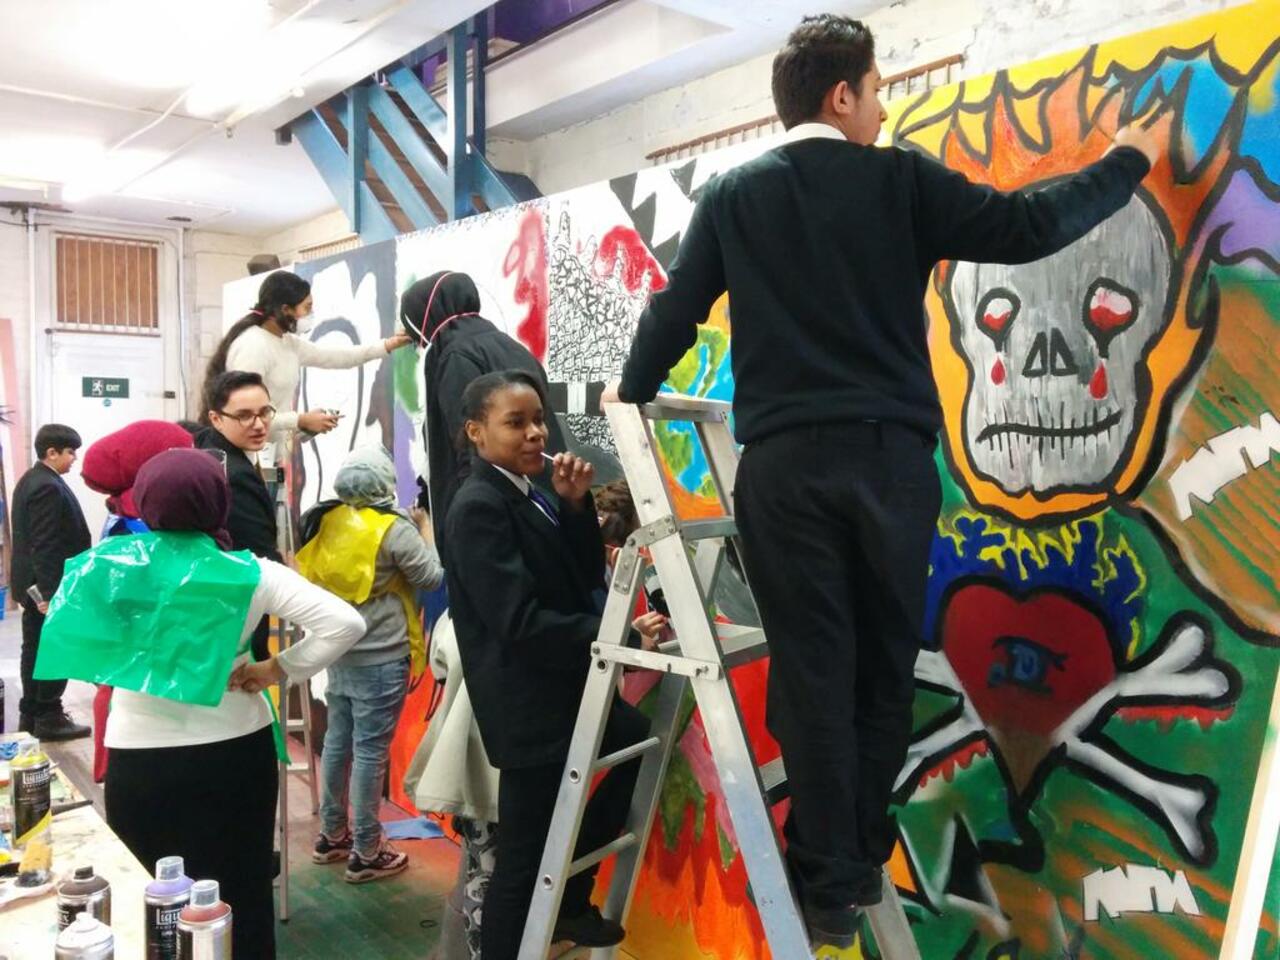 #mural & #graffiti workshop with @ShirelandCA - really great work being produced with year 9!!! http://t.co/SncTRfJr0C